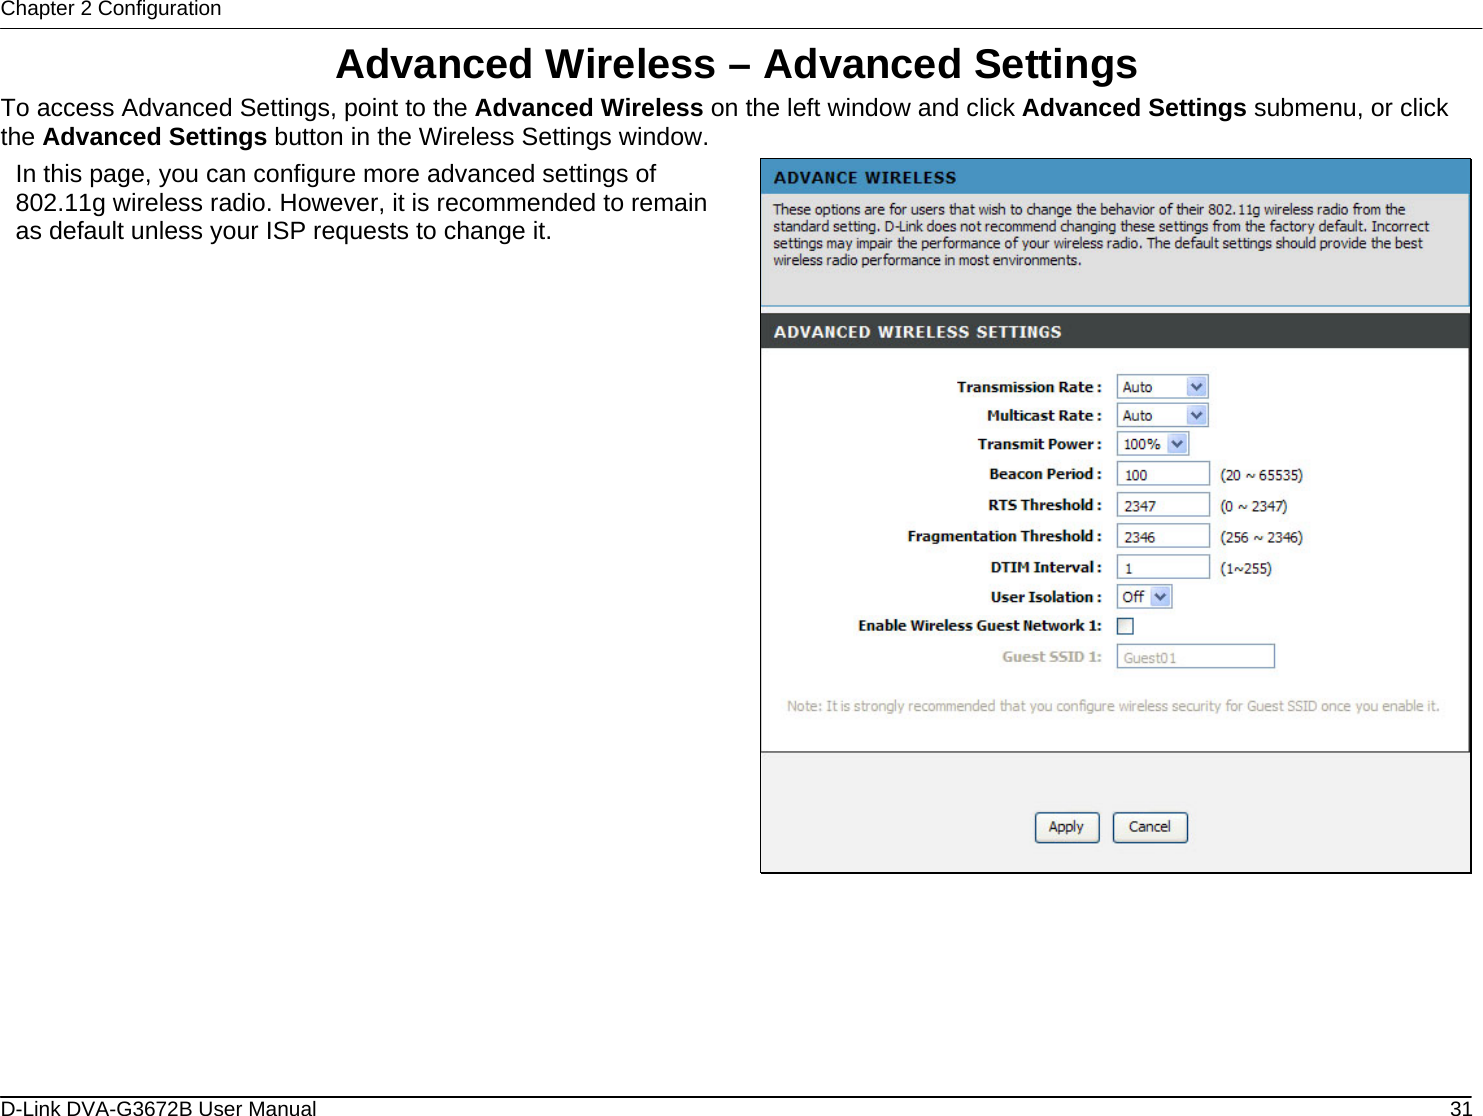 Chapter 2 Configuration Advanced Wireless – Advanced Settings To access Advanced Settings, point to the Advanced Wireless on the left window and click Advanced Settings submenu, or click the Advanced Settings button in the Wireless Settings window. In this page, you can configure more advanced settings of 802.11g wireless radio. However, it is recommended to remain as default unless your ISP requests to change it.          D-Link DVA-G3672B User Manual  31